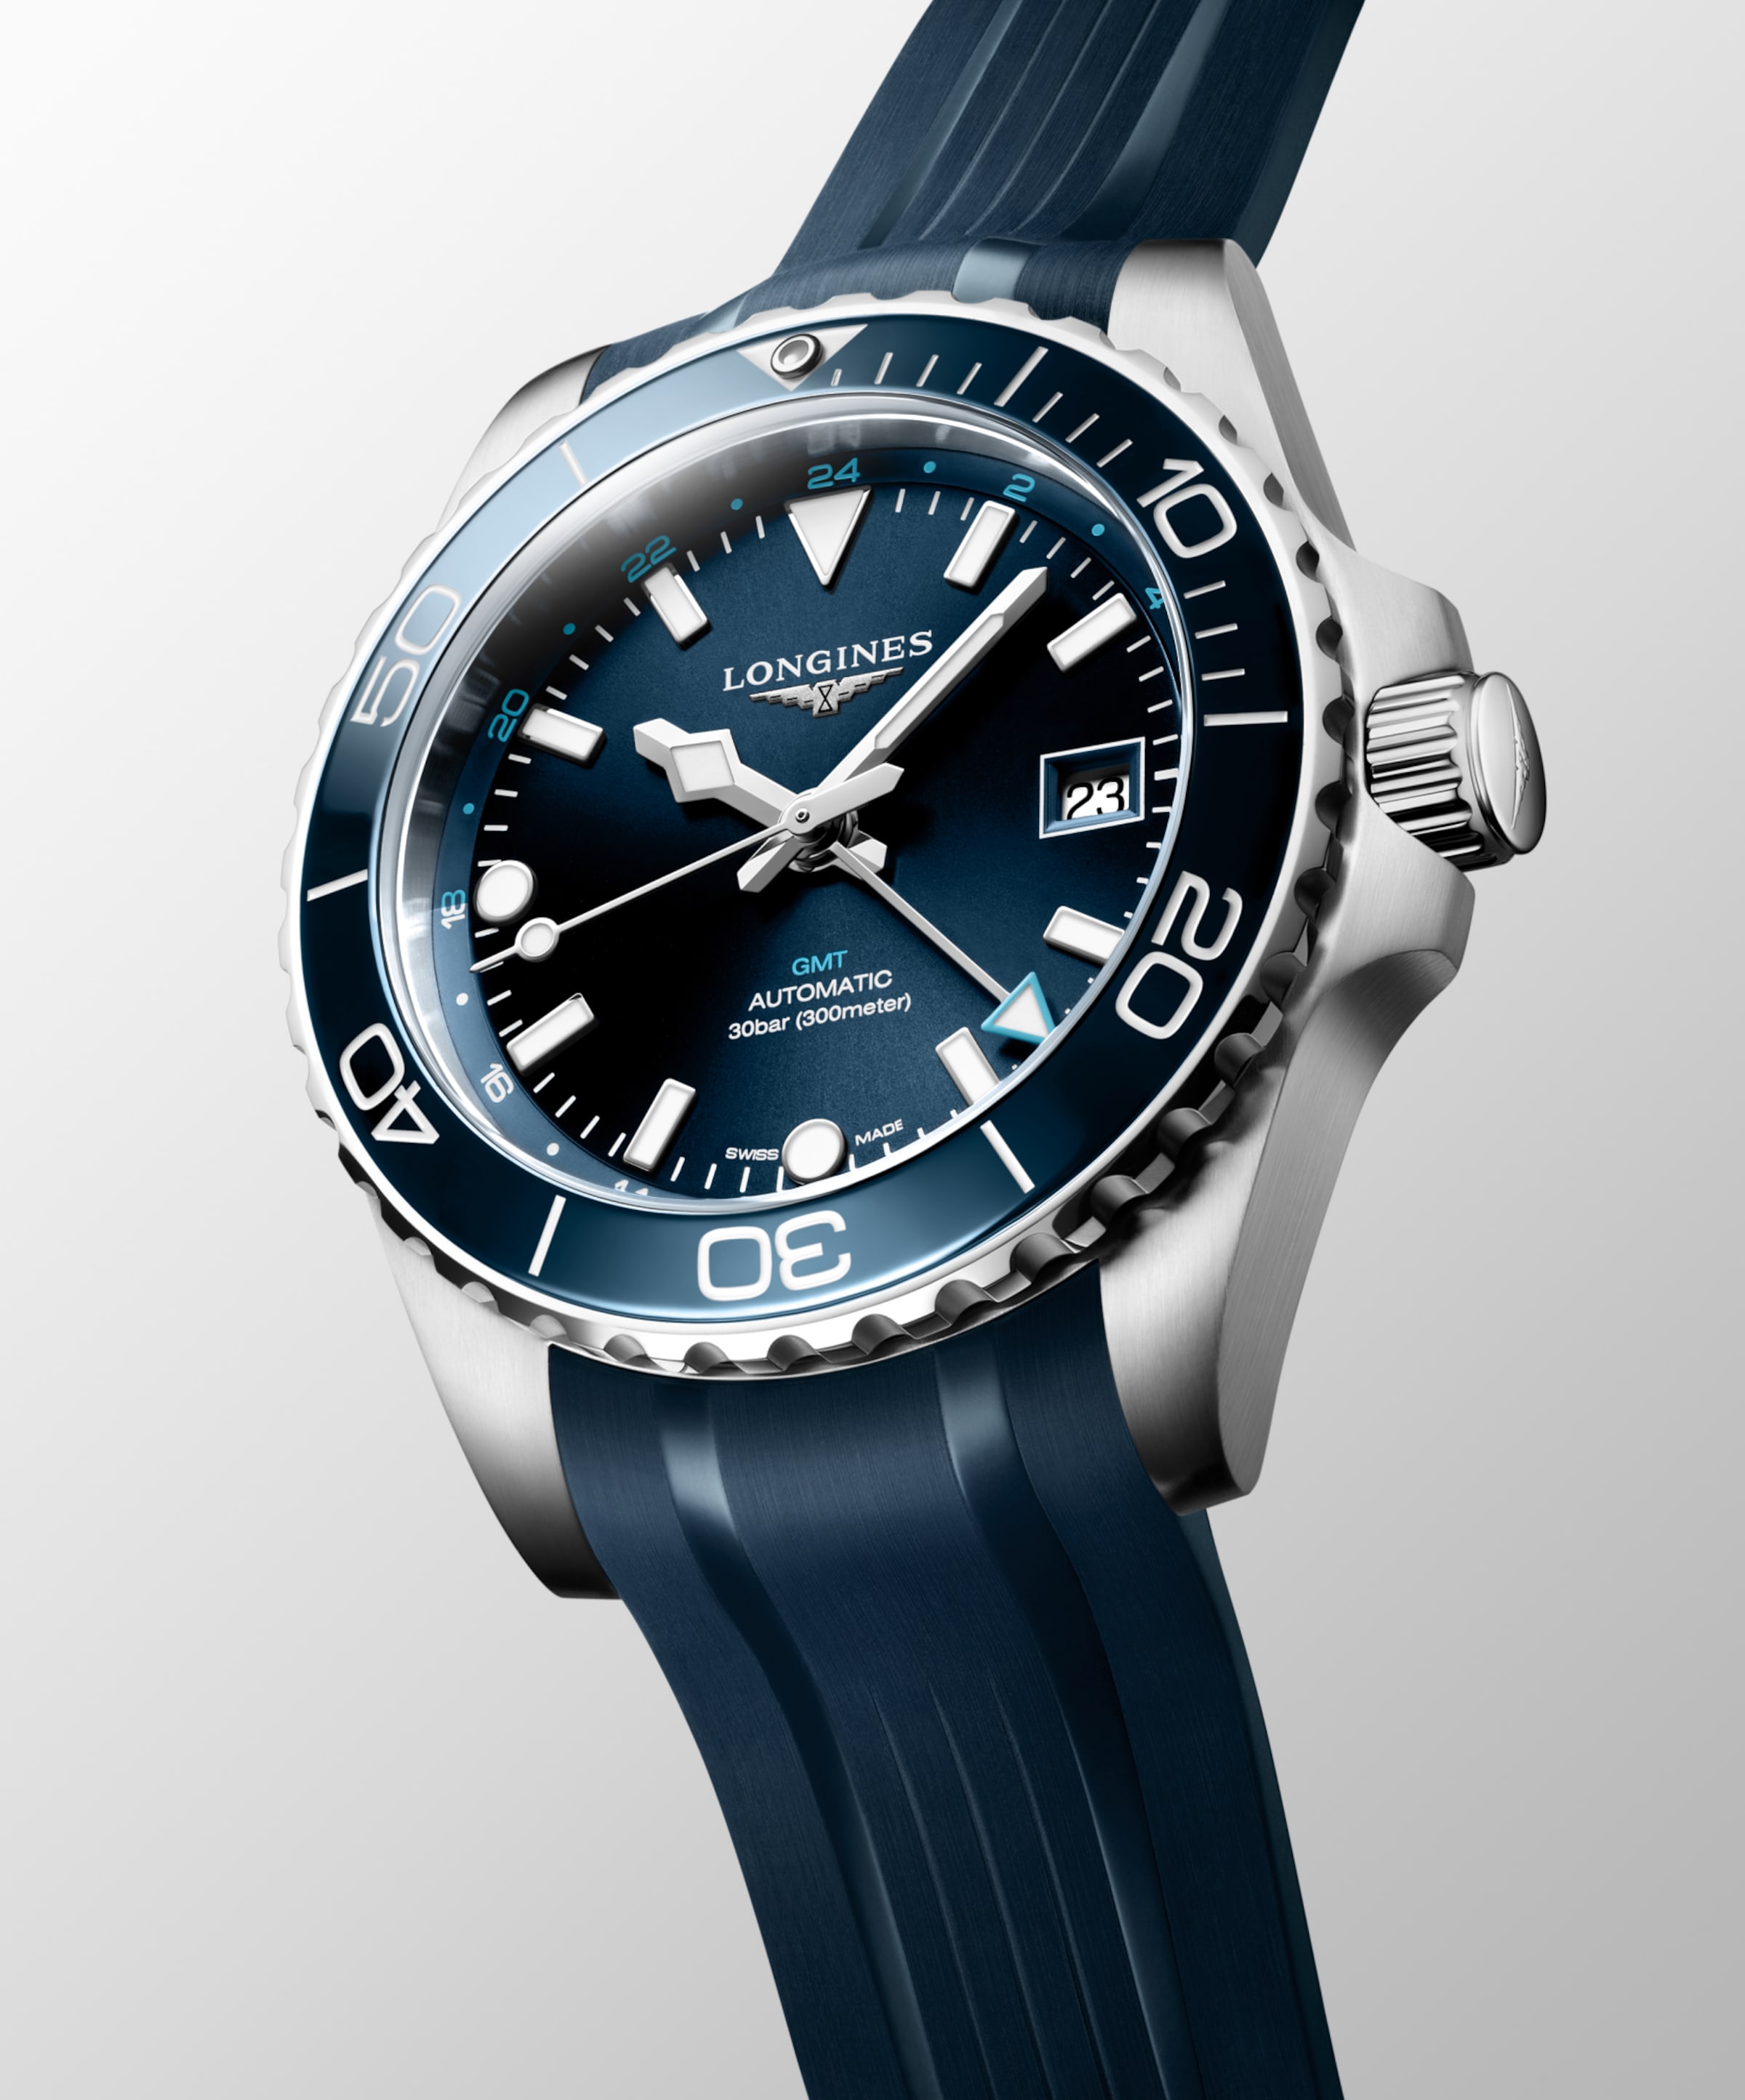 Longines HYDROCONQUEST Automatic Stainless steel and ceramic bezel Watch - L3.790.4.96.9